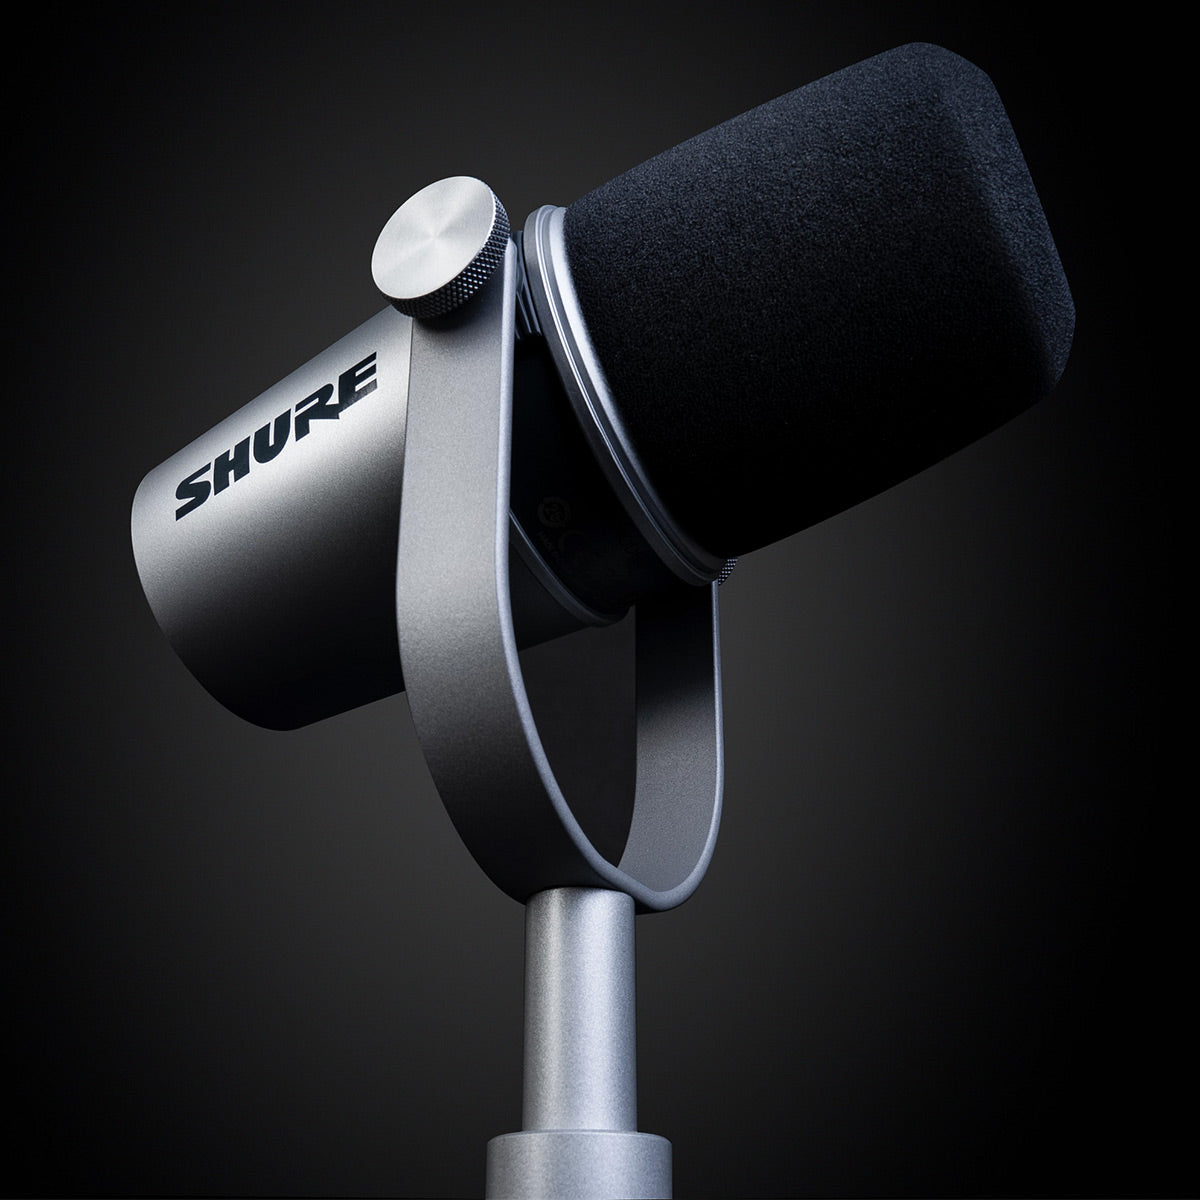 Shure MV7 USB/XLR Dynamic Microphone for Podcasting, Recording, Live Streaming & Gaming with Built-in Headphone Output (Silver)